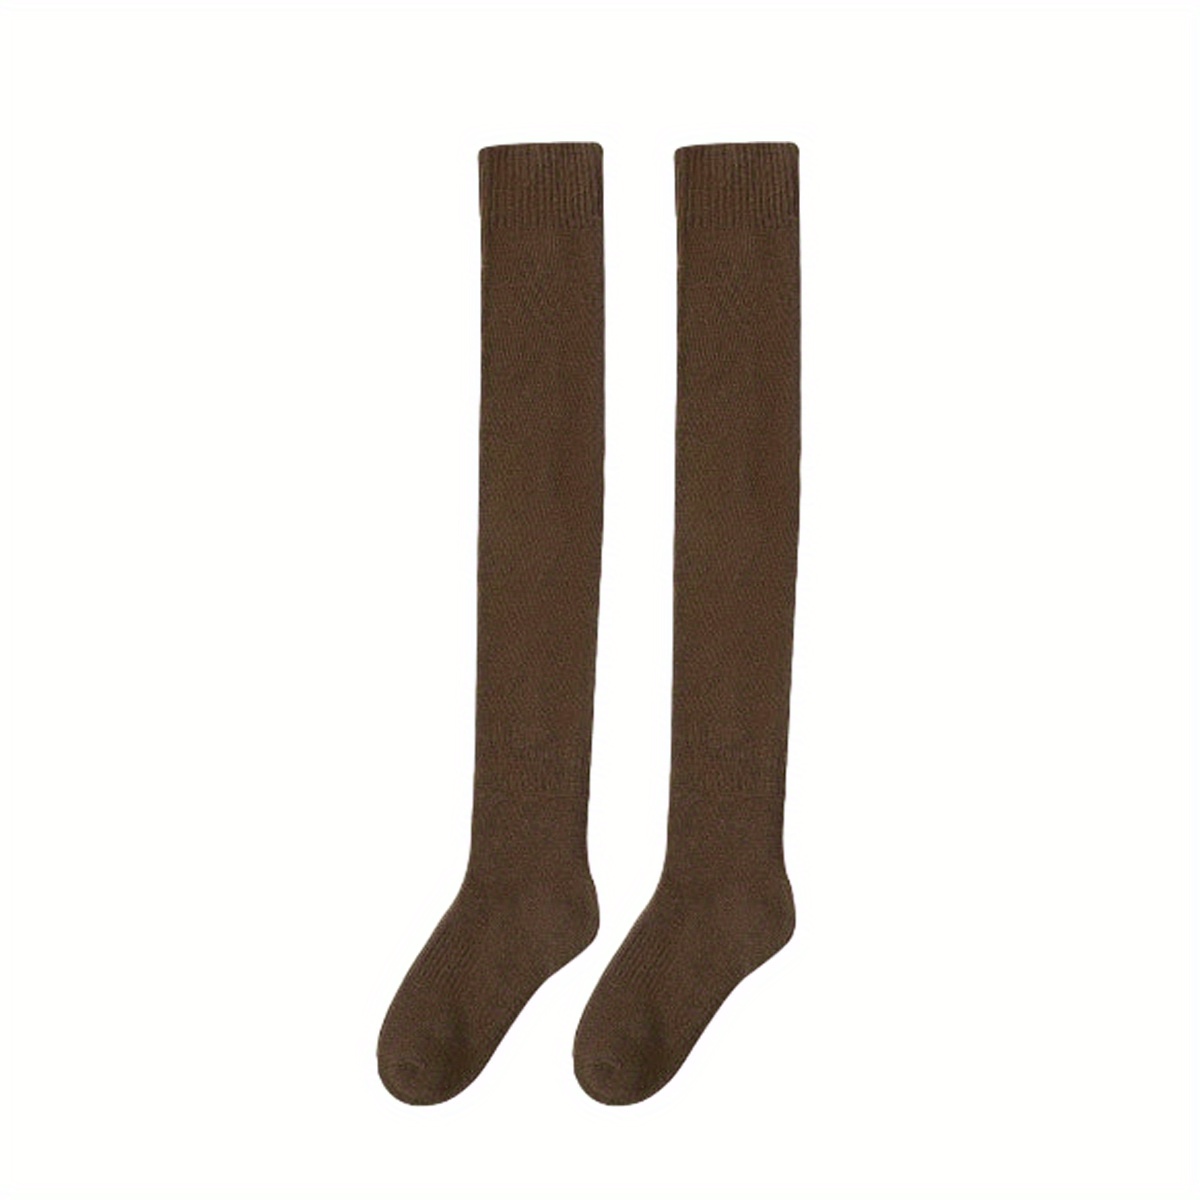 1 Pair Over The Knee Socks Womens High Socks Autumn And Winter Thickened  Warm Thigh Socks Winter Terry Stockings Knee, Shop The Latest Trends